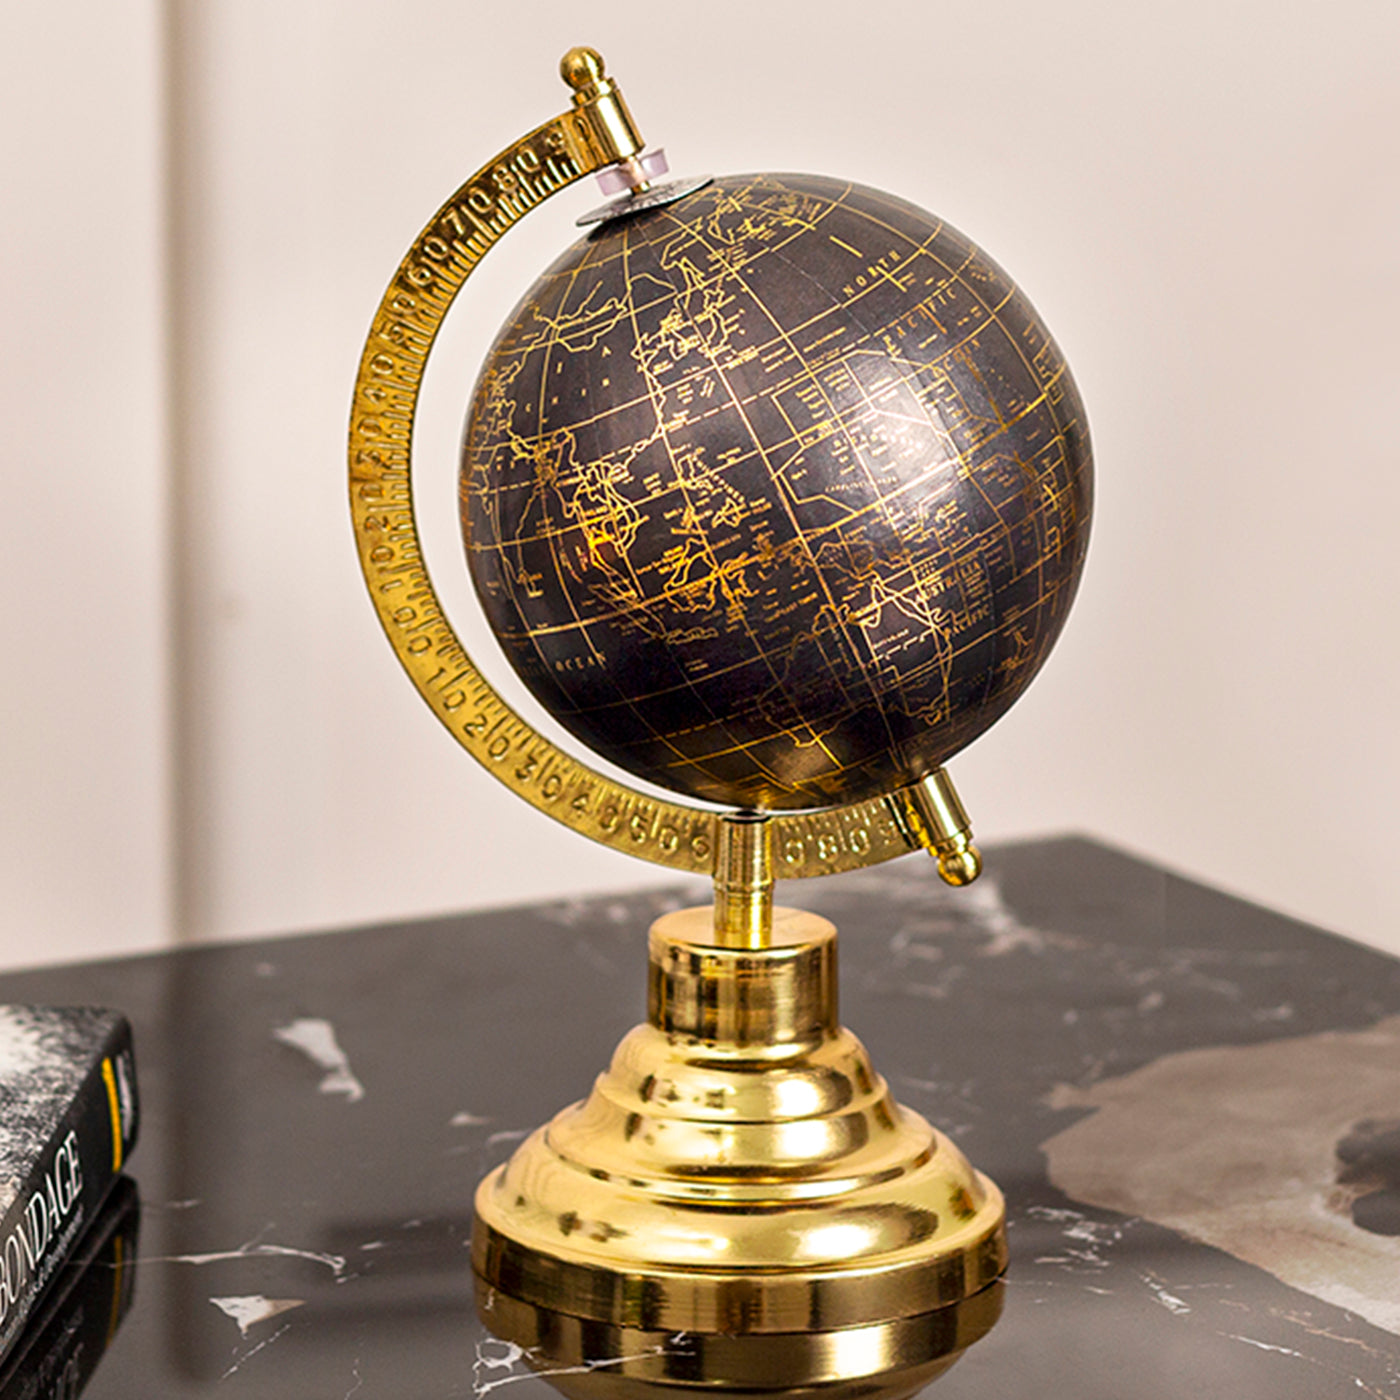 Jorden Black and Gold Globe on Brass Stand